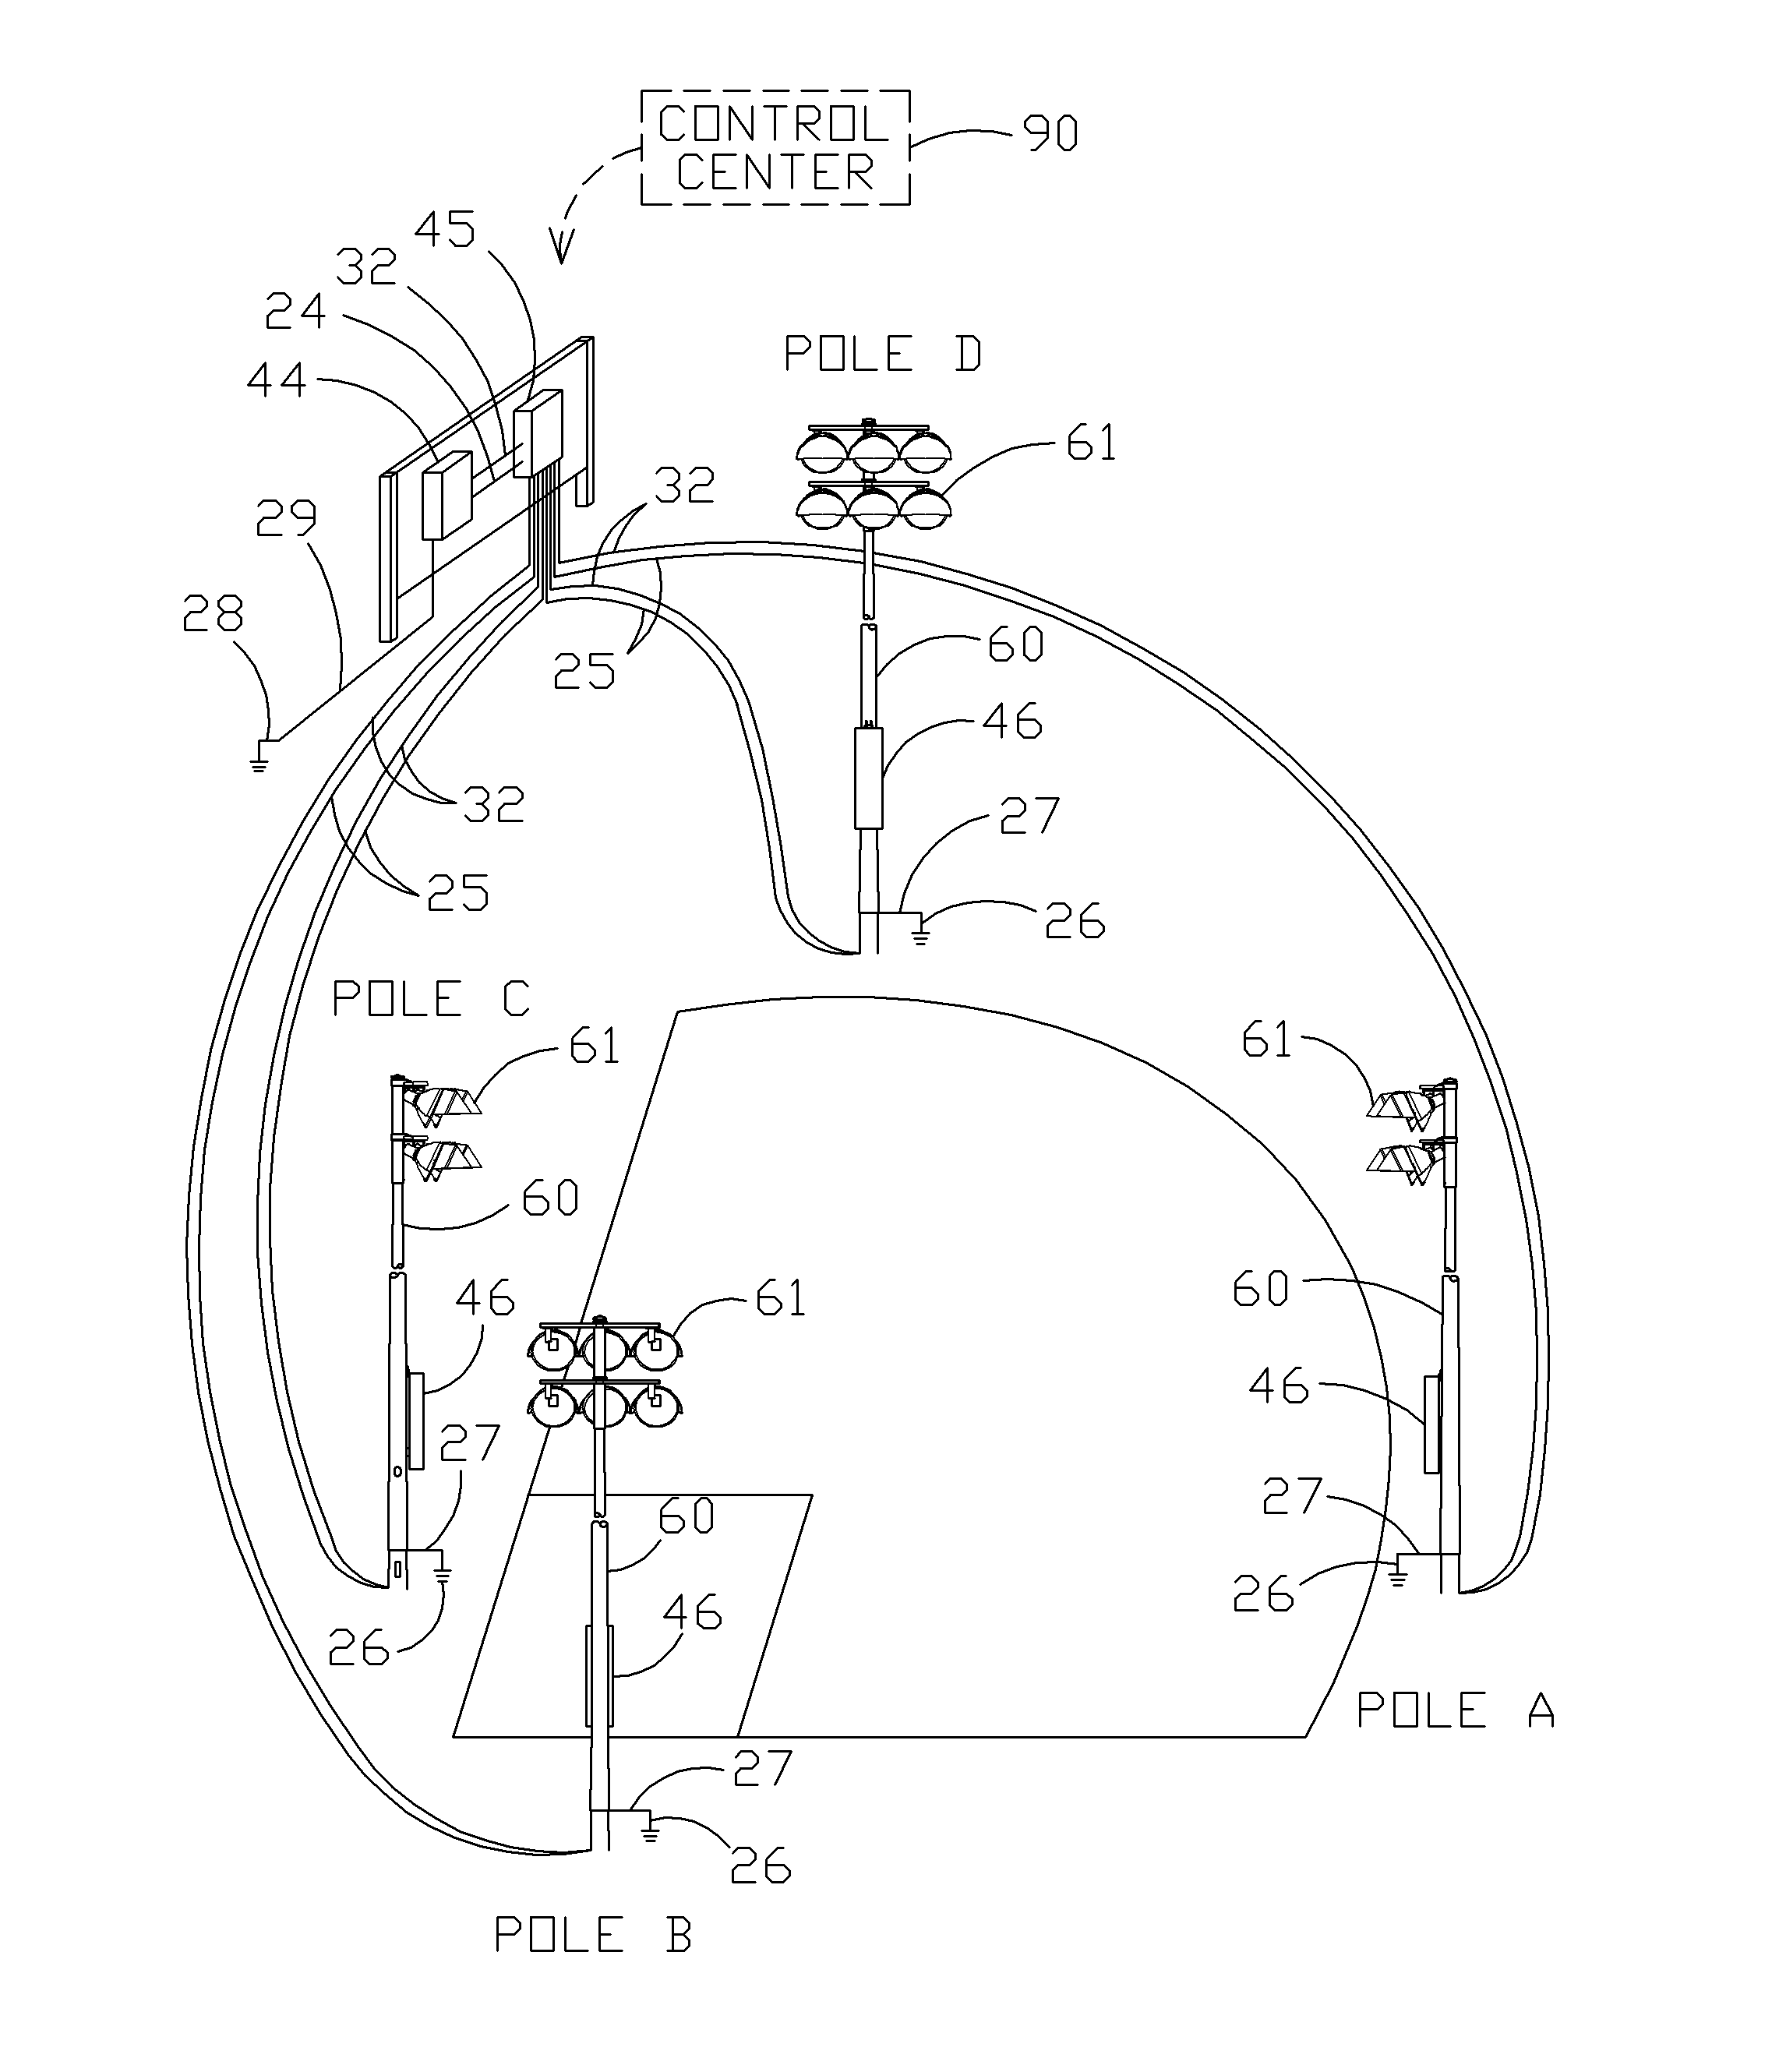 Apparatus, method, and system for monitoring of equipment and earth ground systems